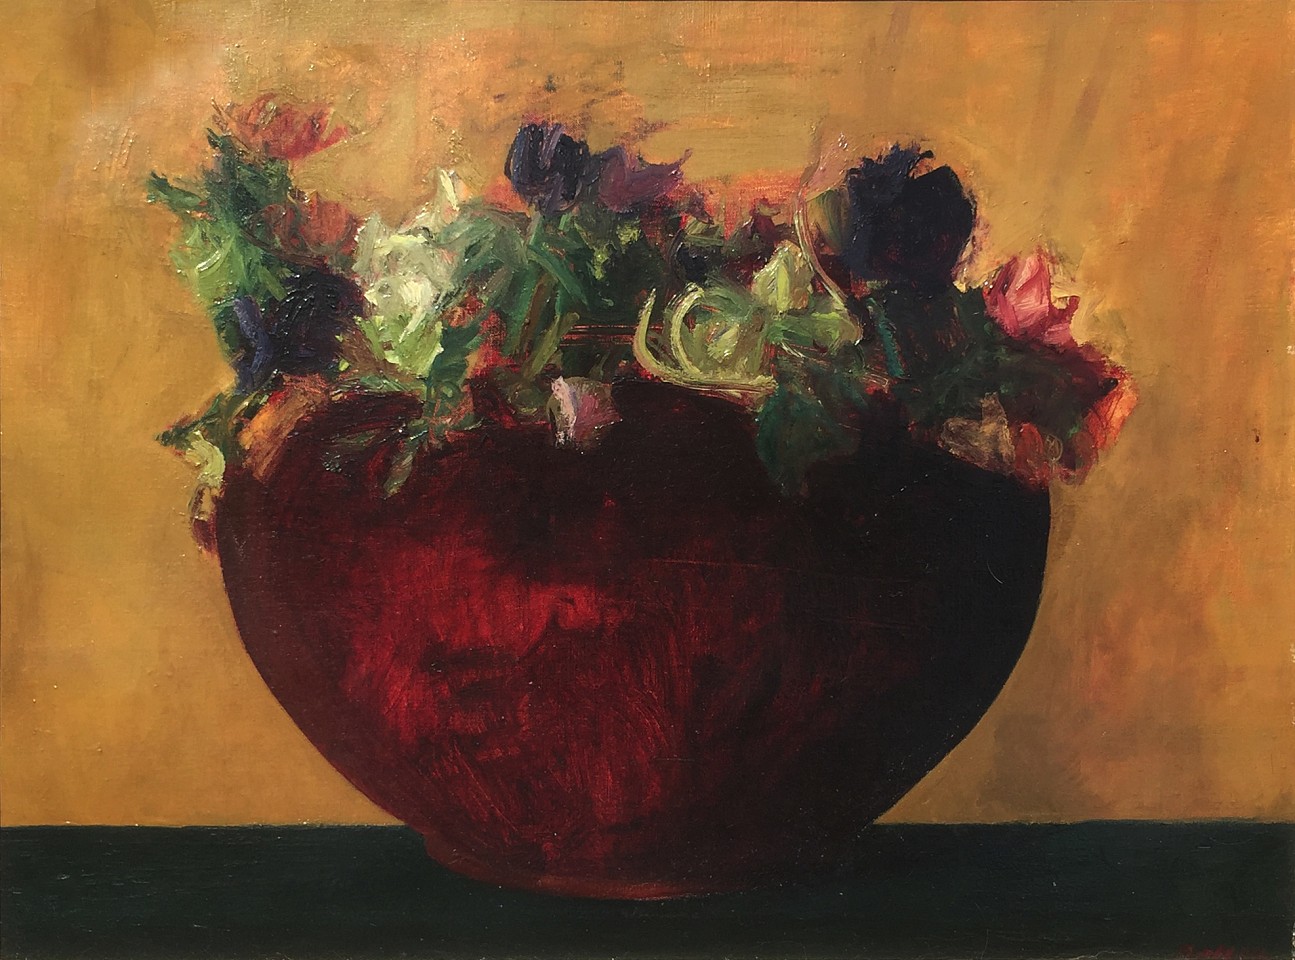 Haidee Becker, Pot of Anemones, 1986
oil on canvas, 18.5" x 24", 23.5" x 28" framed
CUST 54-HB 113
Price Upon Request